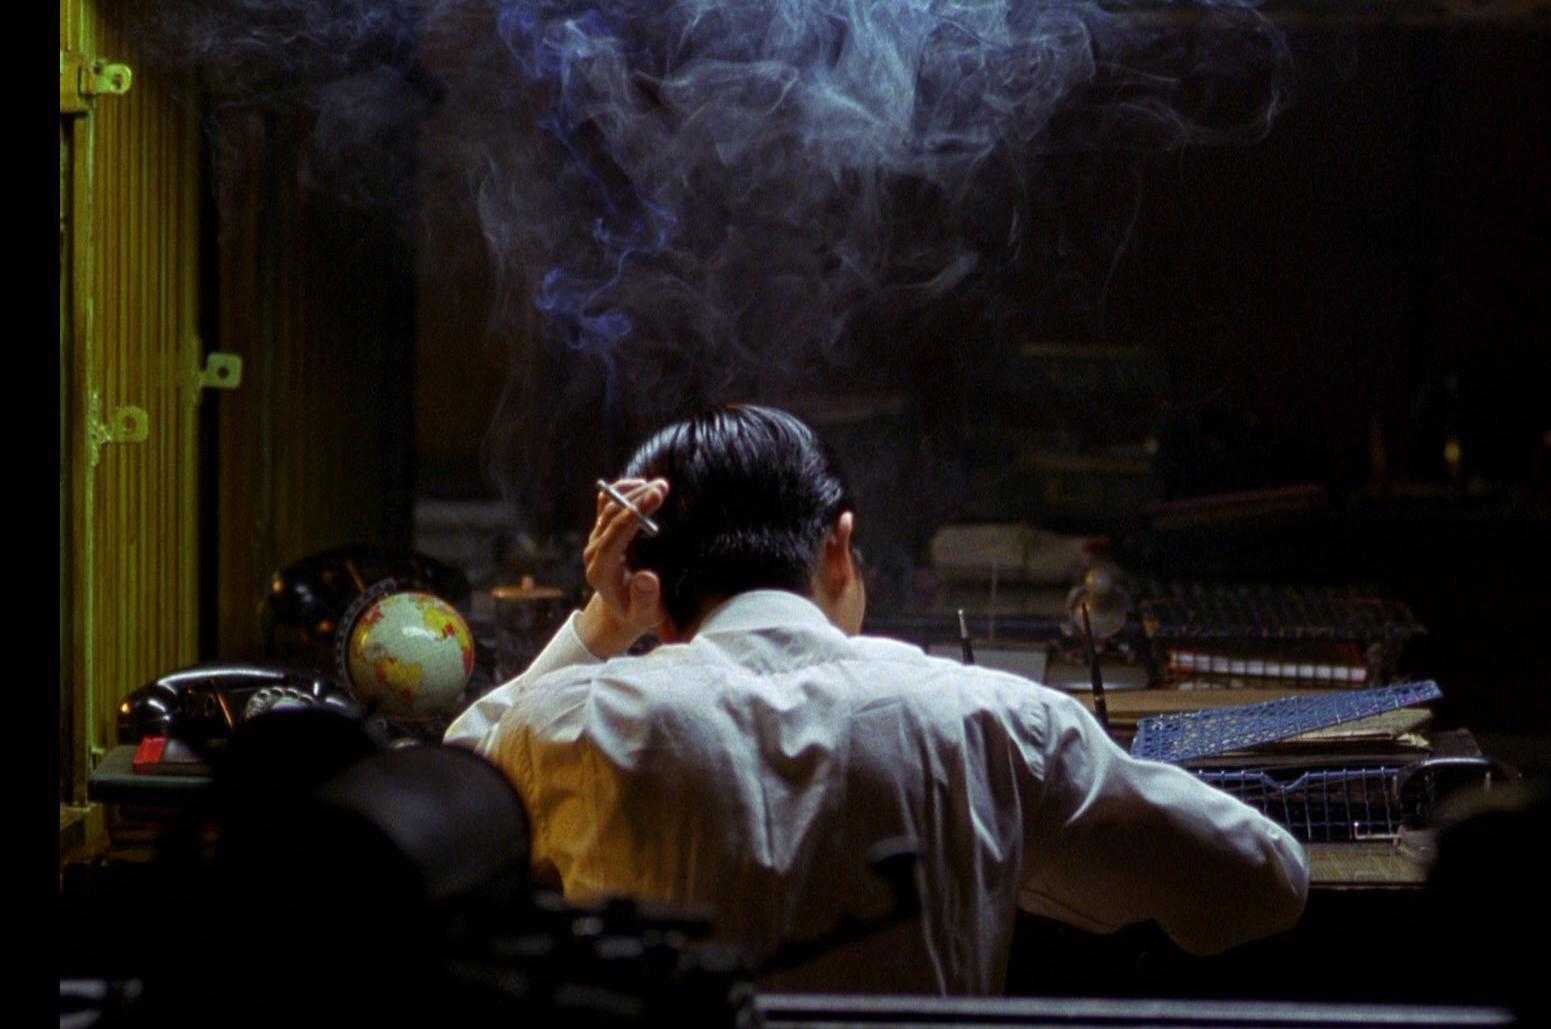 Tony Leung in 'In the Mood for Love'